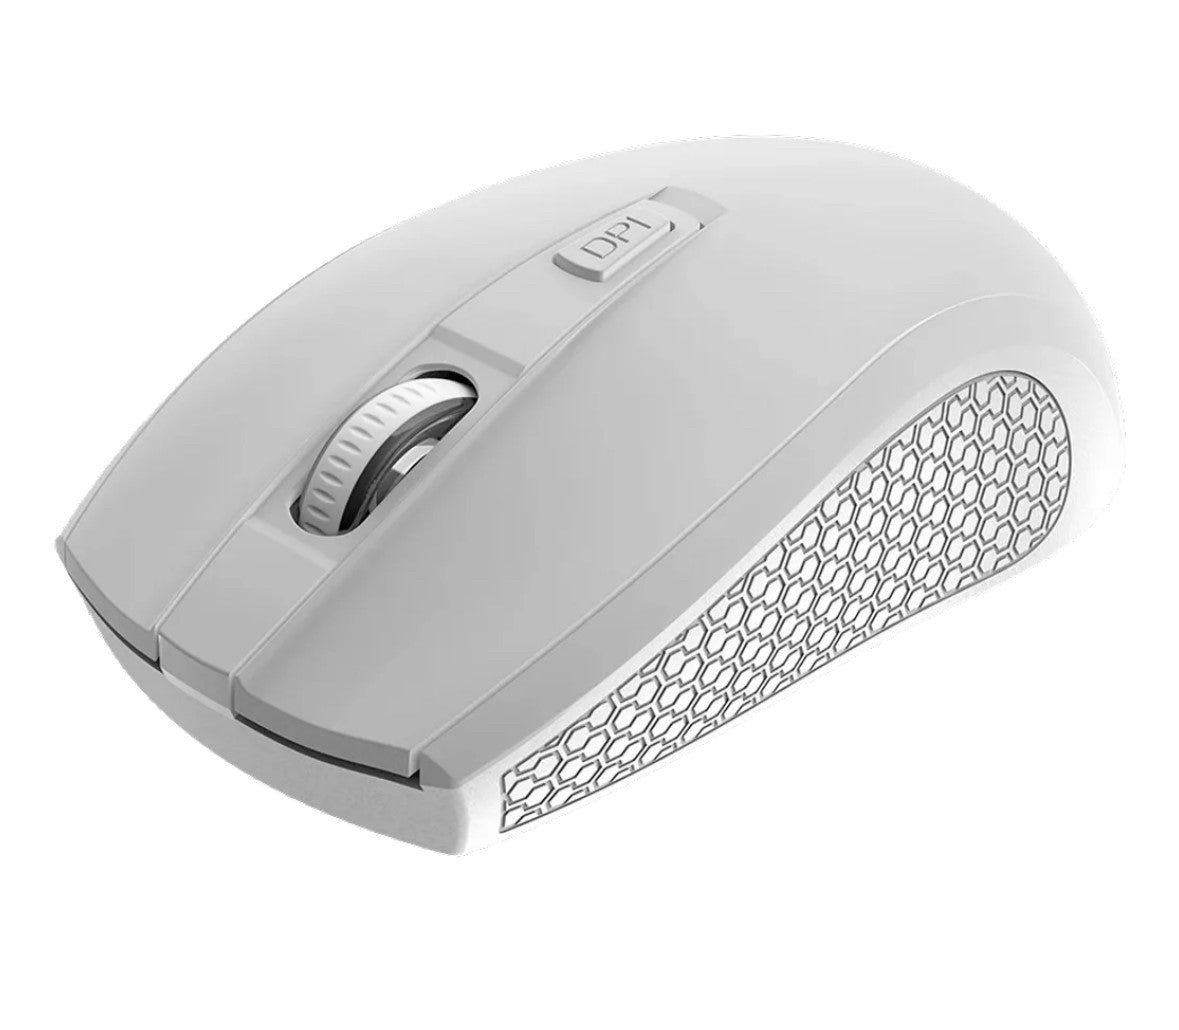 CANYON MW-7, 2.4Ghz wireless mouse, 4 buttons, with 1 AA battery - white